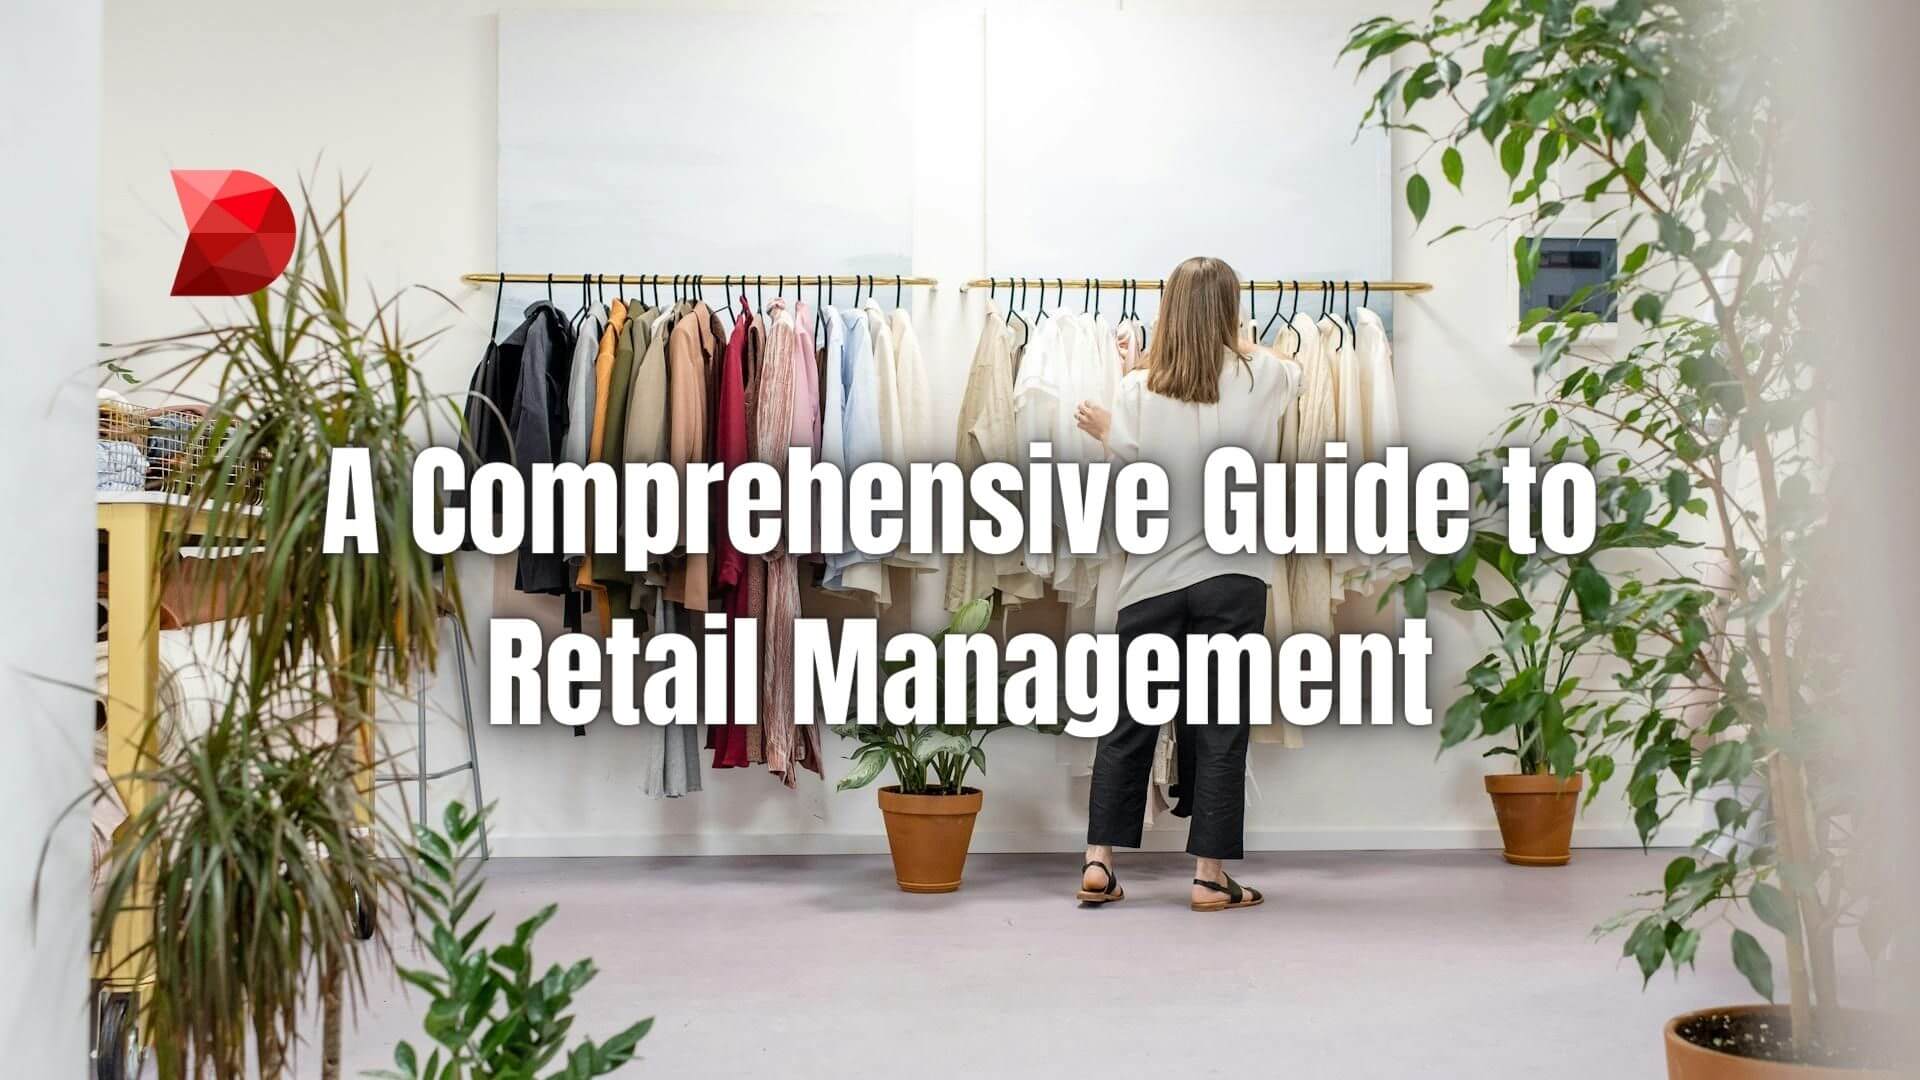 Unlock the secrets of effective retail management with our guide. Learn strategies for success, staff management, and customer satisfaction.